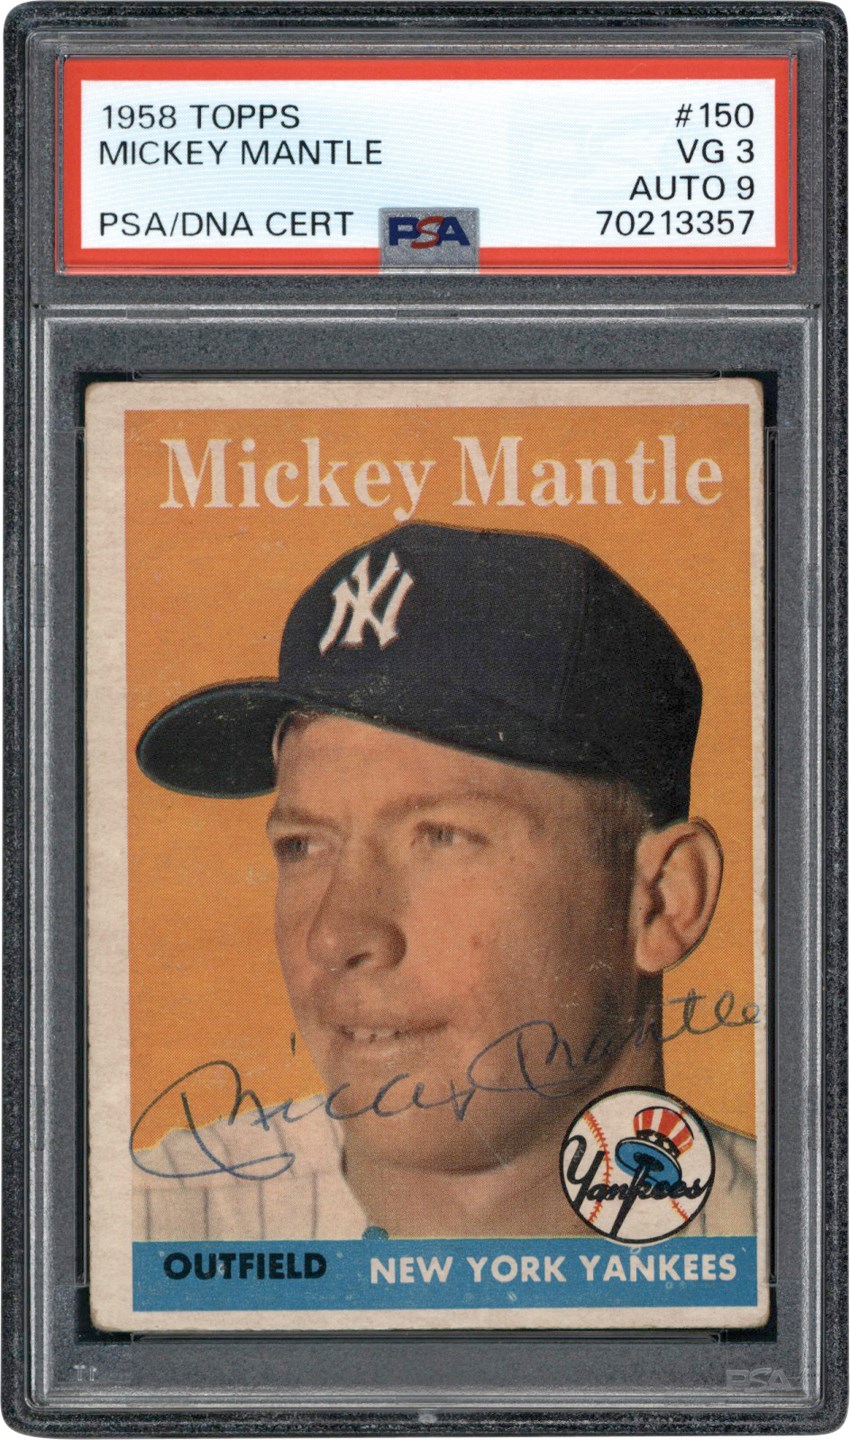 Signed 1958 Topps #150 Mickey Mantle PSA VG 3 Auto 9